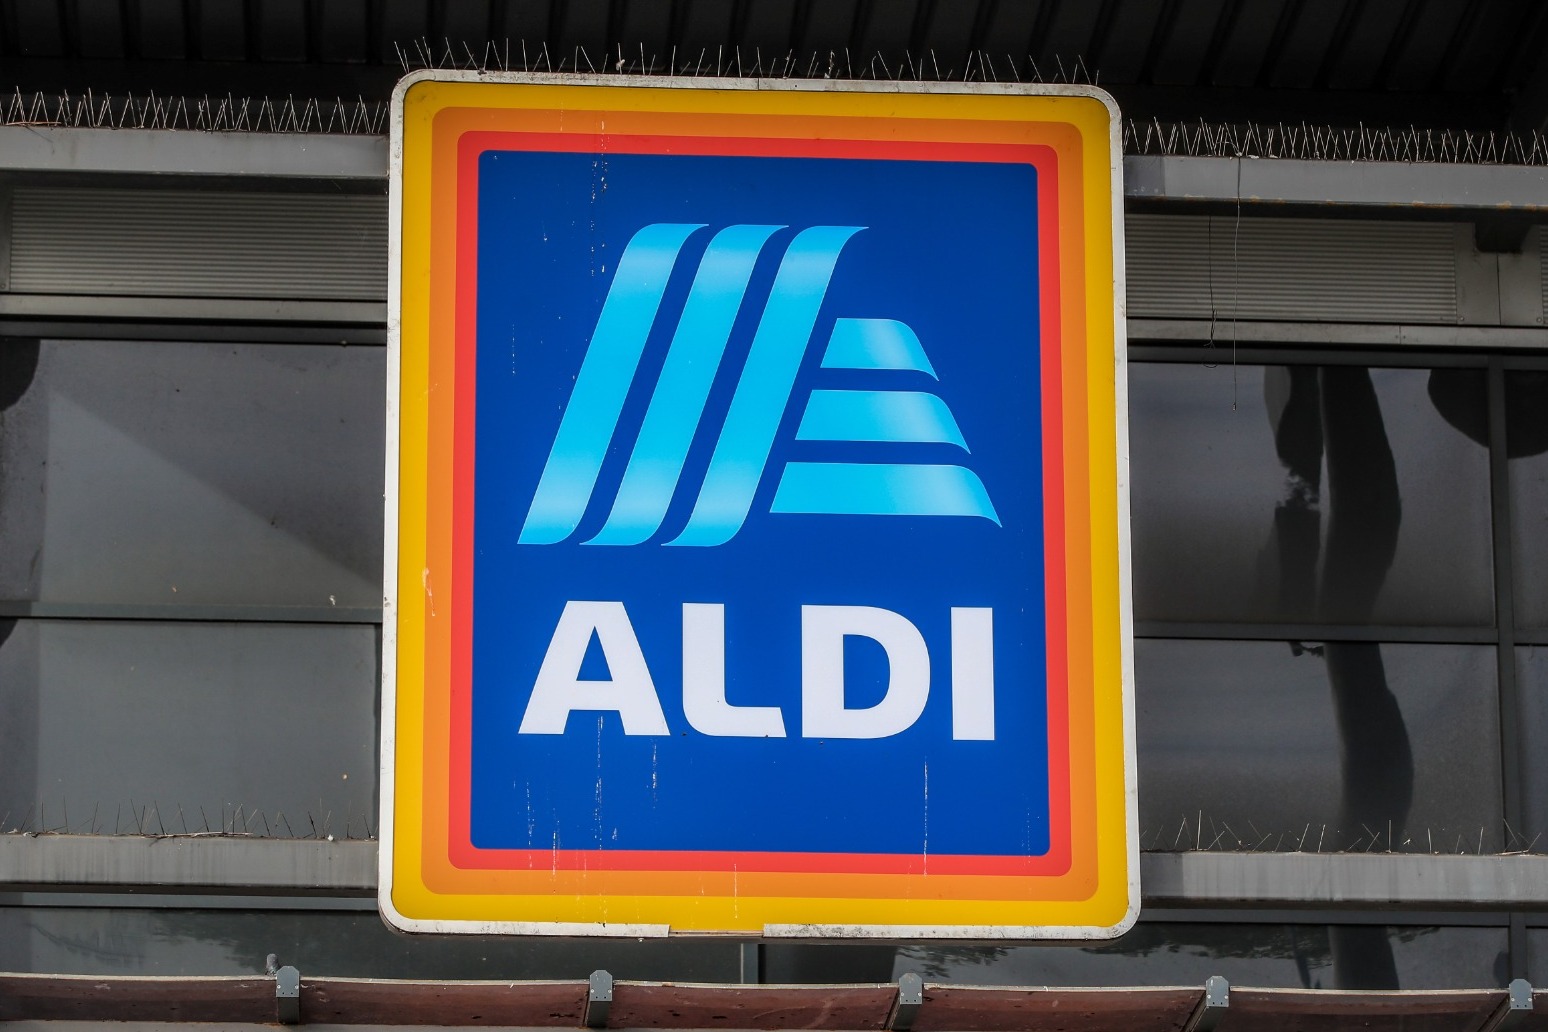 Preserving lower prices more important than short-term profit, says Aldi boss 